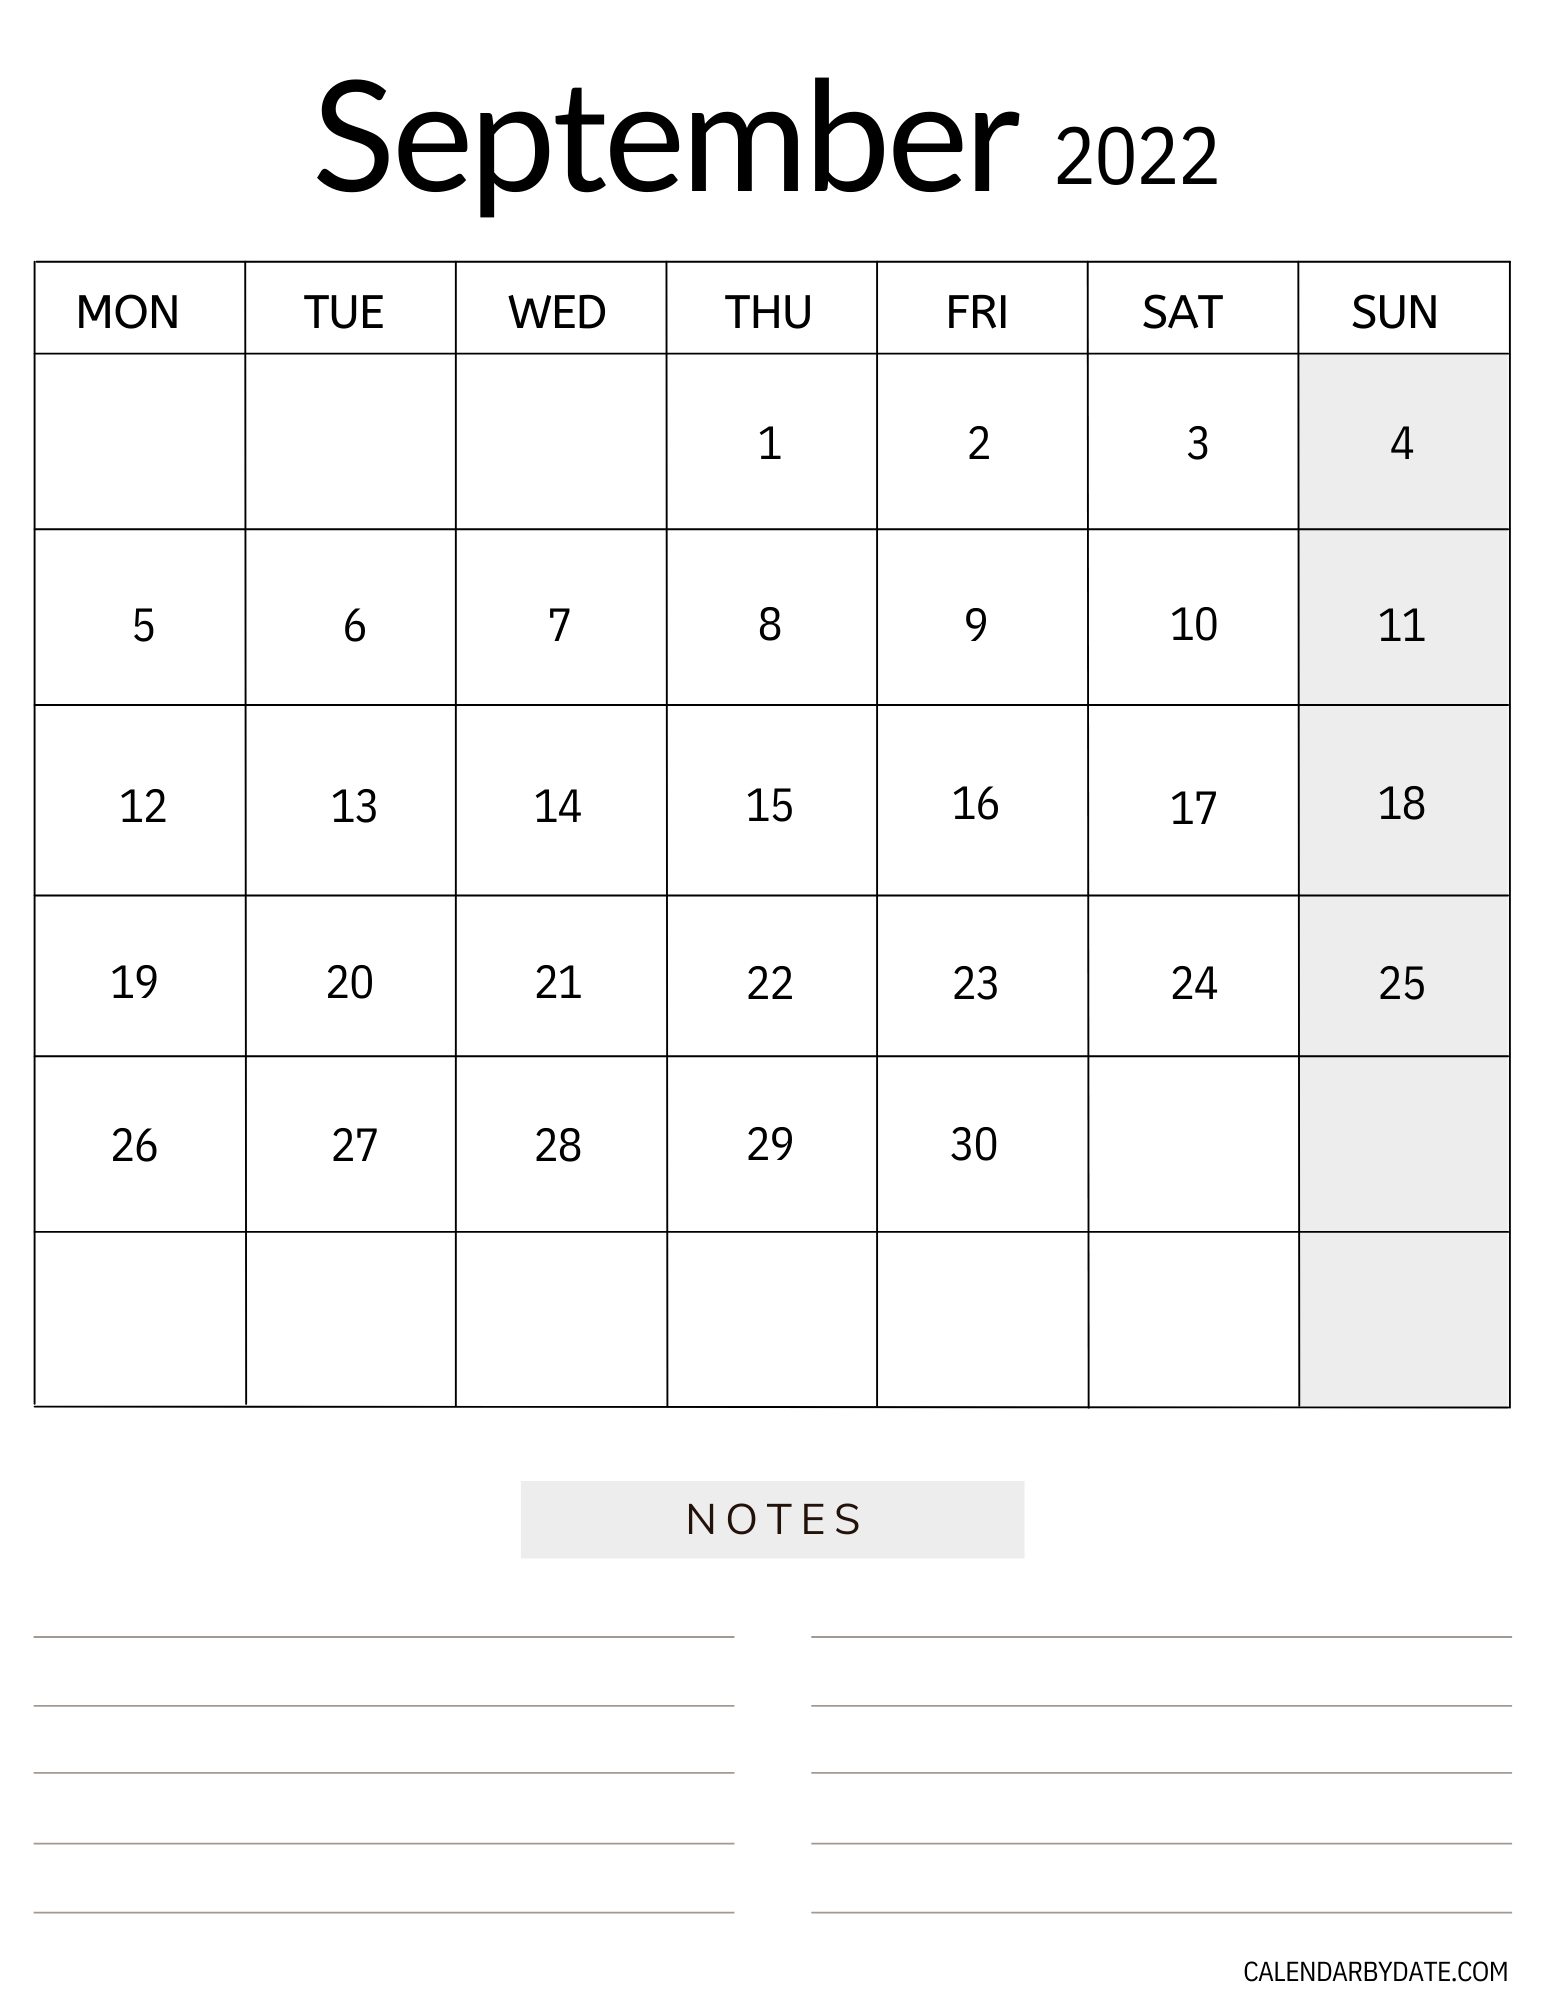 Monthly September 2022 calendar in vertical layout with separate notes section at the bottom. This template has bold monthly dates written in the grid.